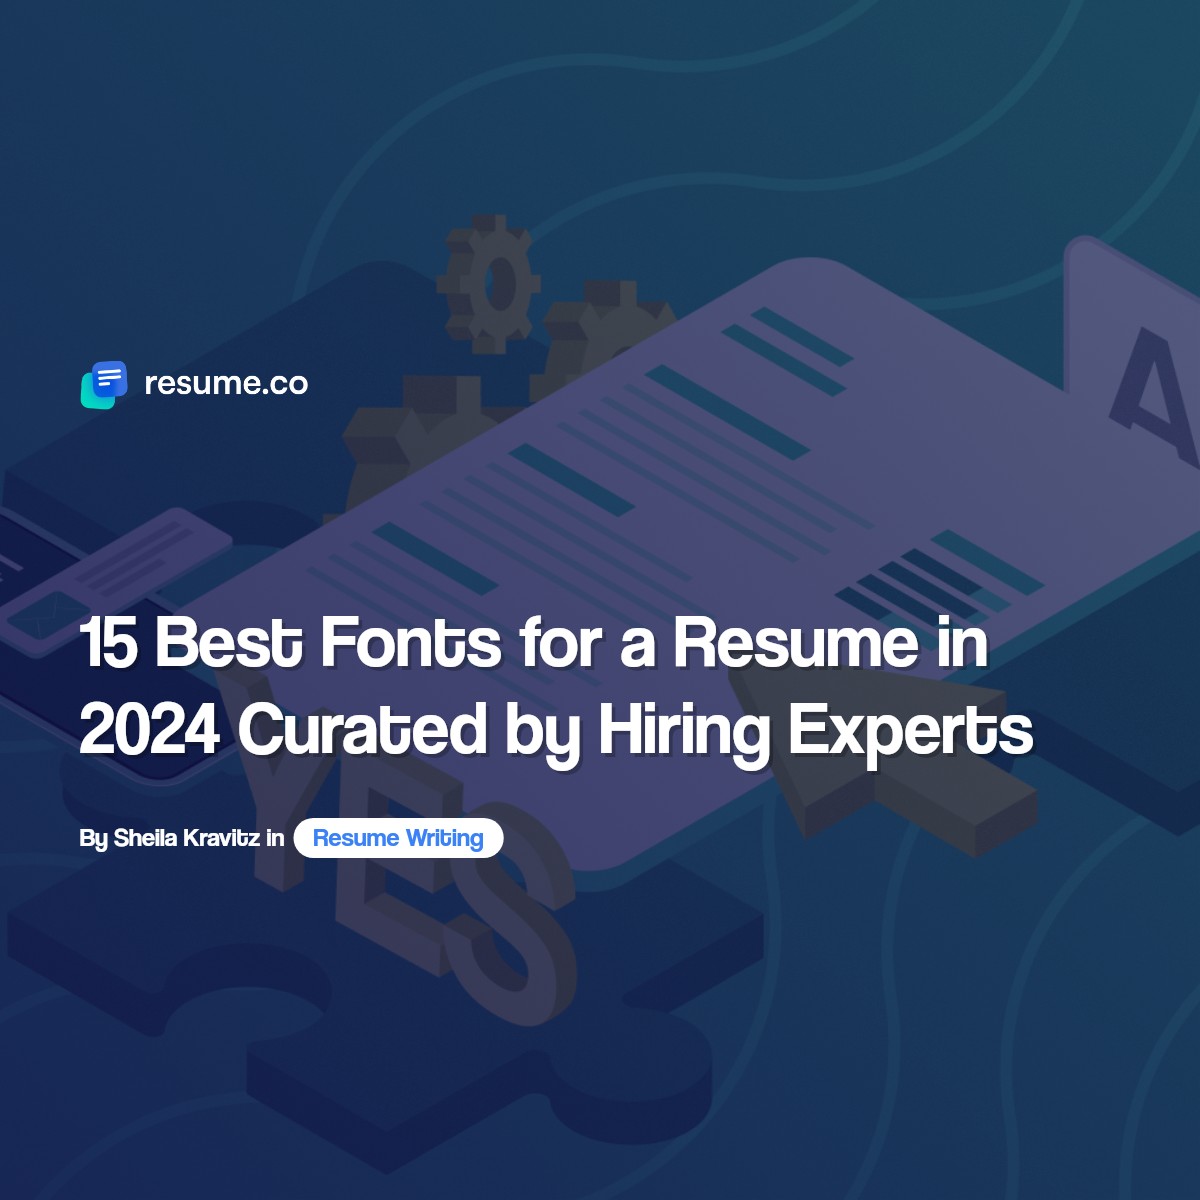 15 Best Fonts for a Resume in 2024 Curated by Hiring Experts